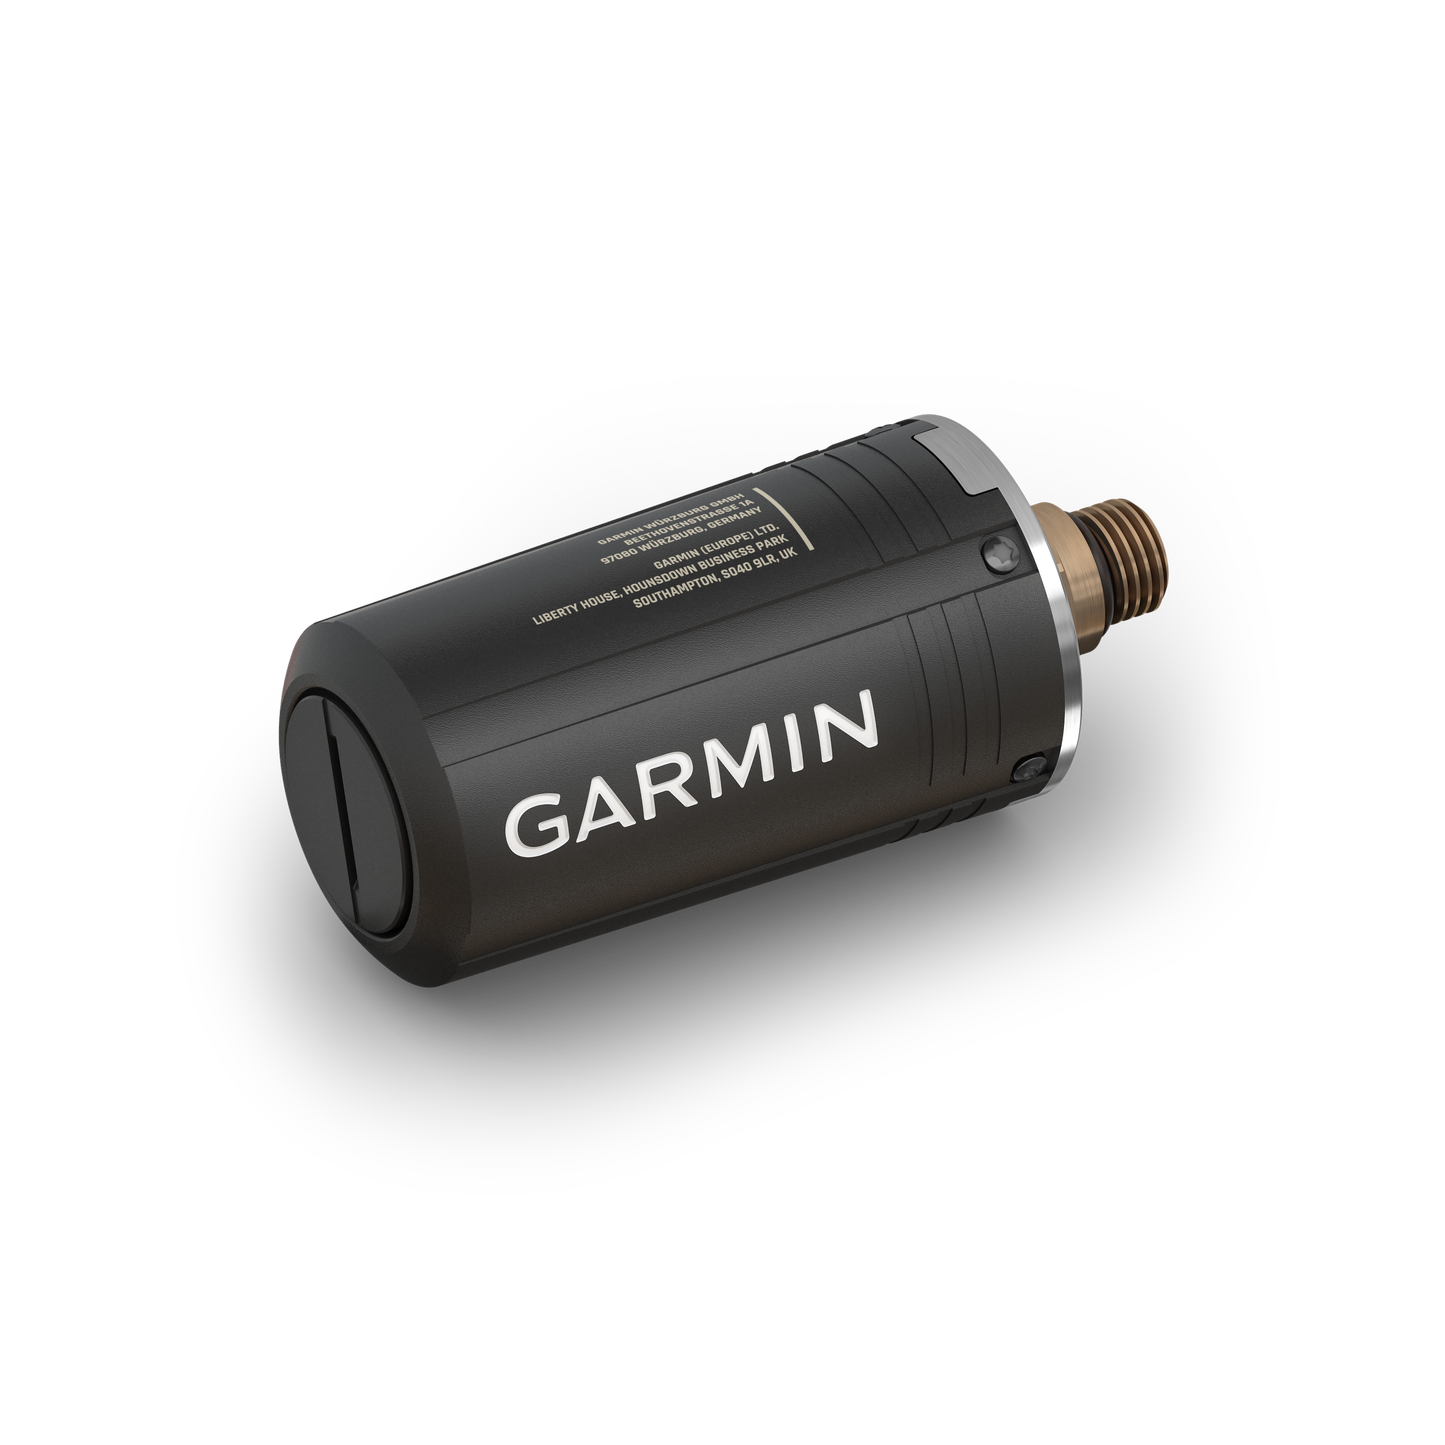 Garmin Descent™ Mk3 43mm Stainless Steel with Fog Grey Silicone Band + Descent T2 Transceiver (Option)